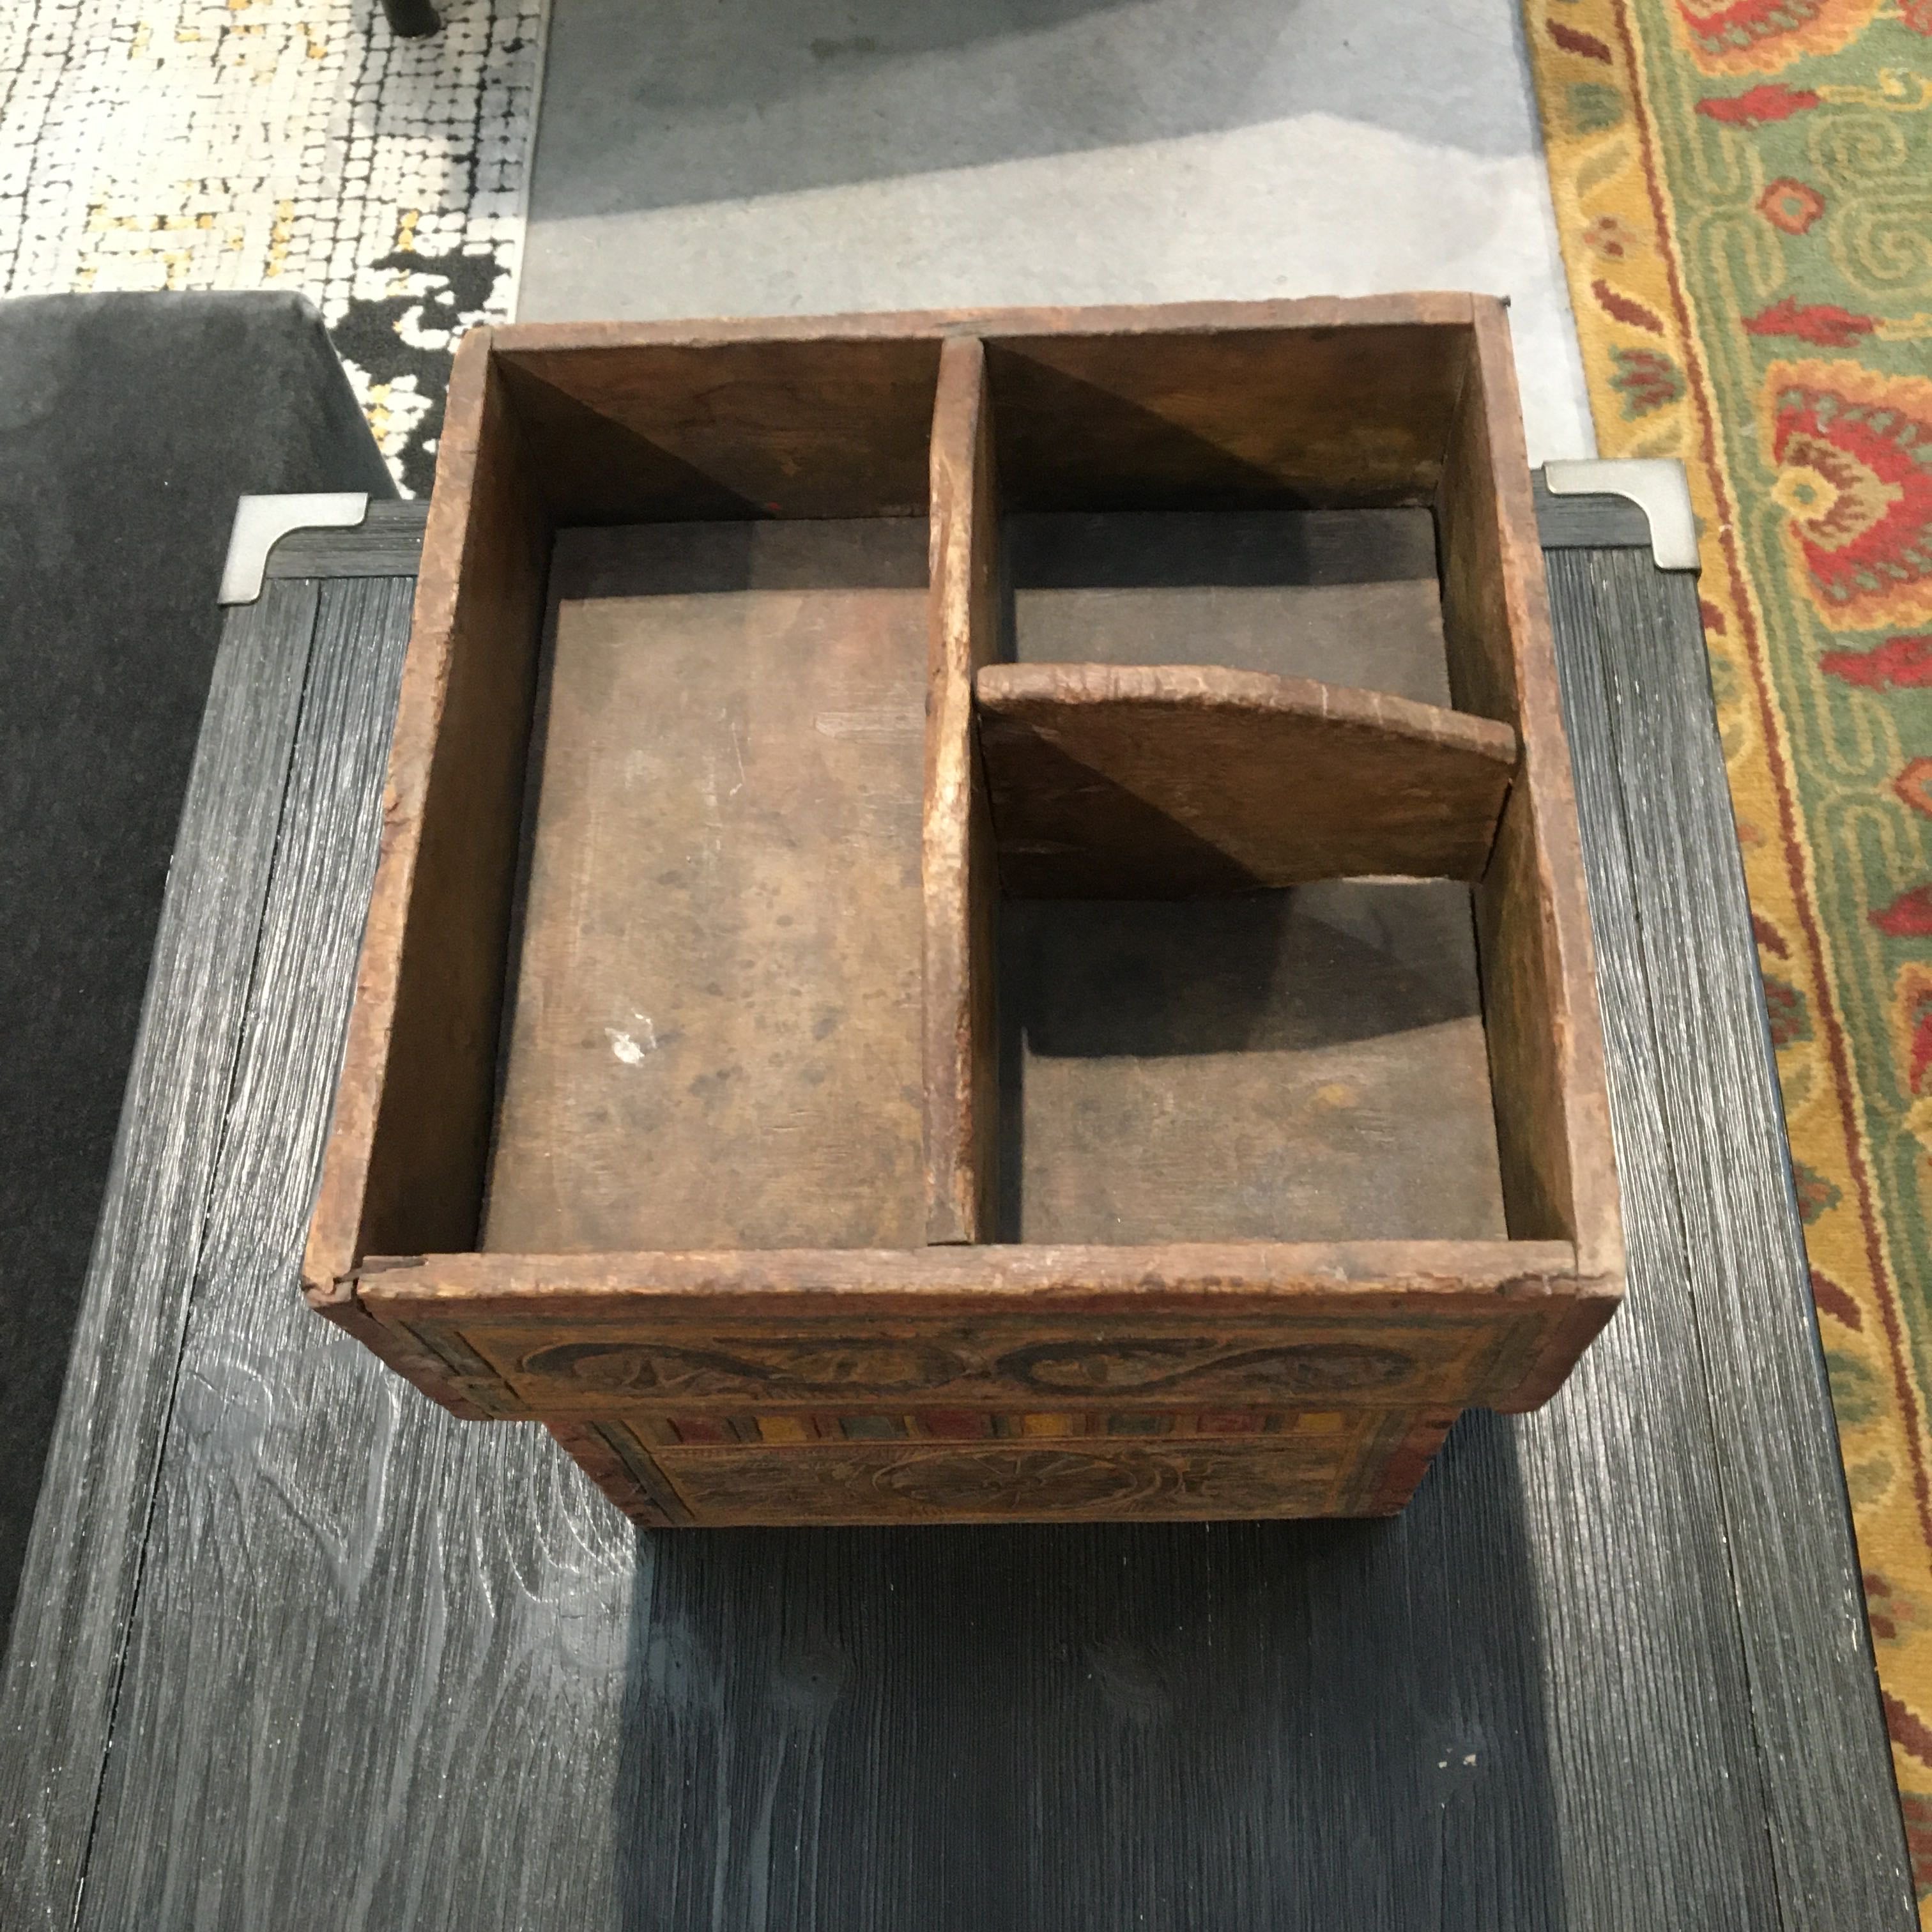 Antique Wood Sewing Box Very Rustic Wood Box Sewing Box with